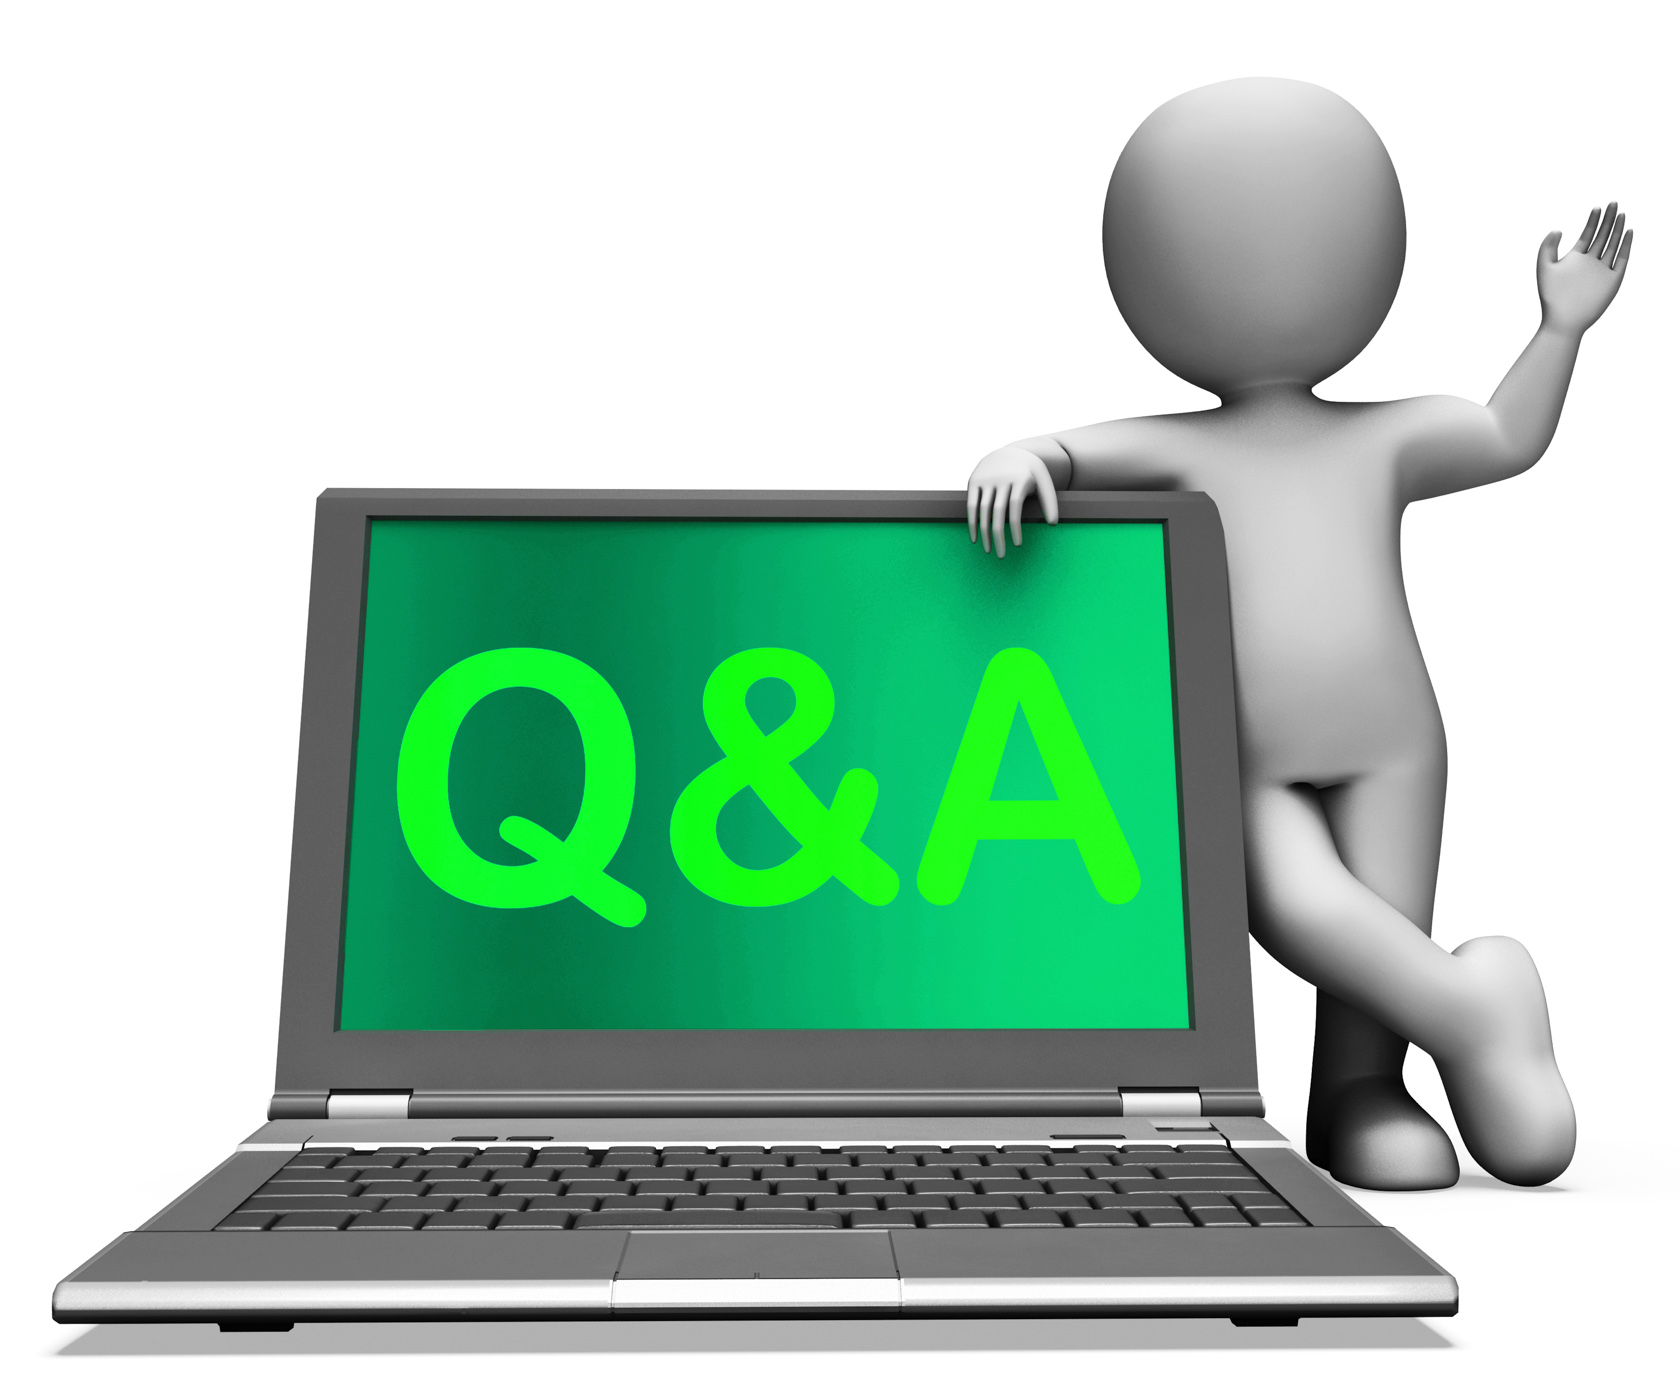 Qa laptop shows question and answer online photo